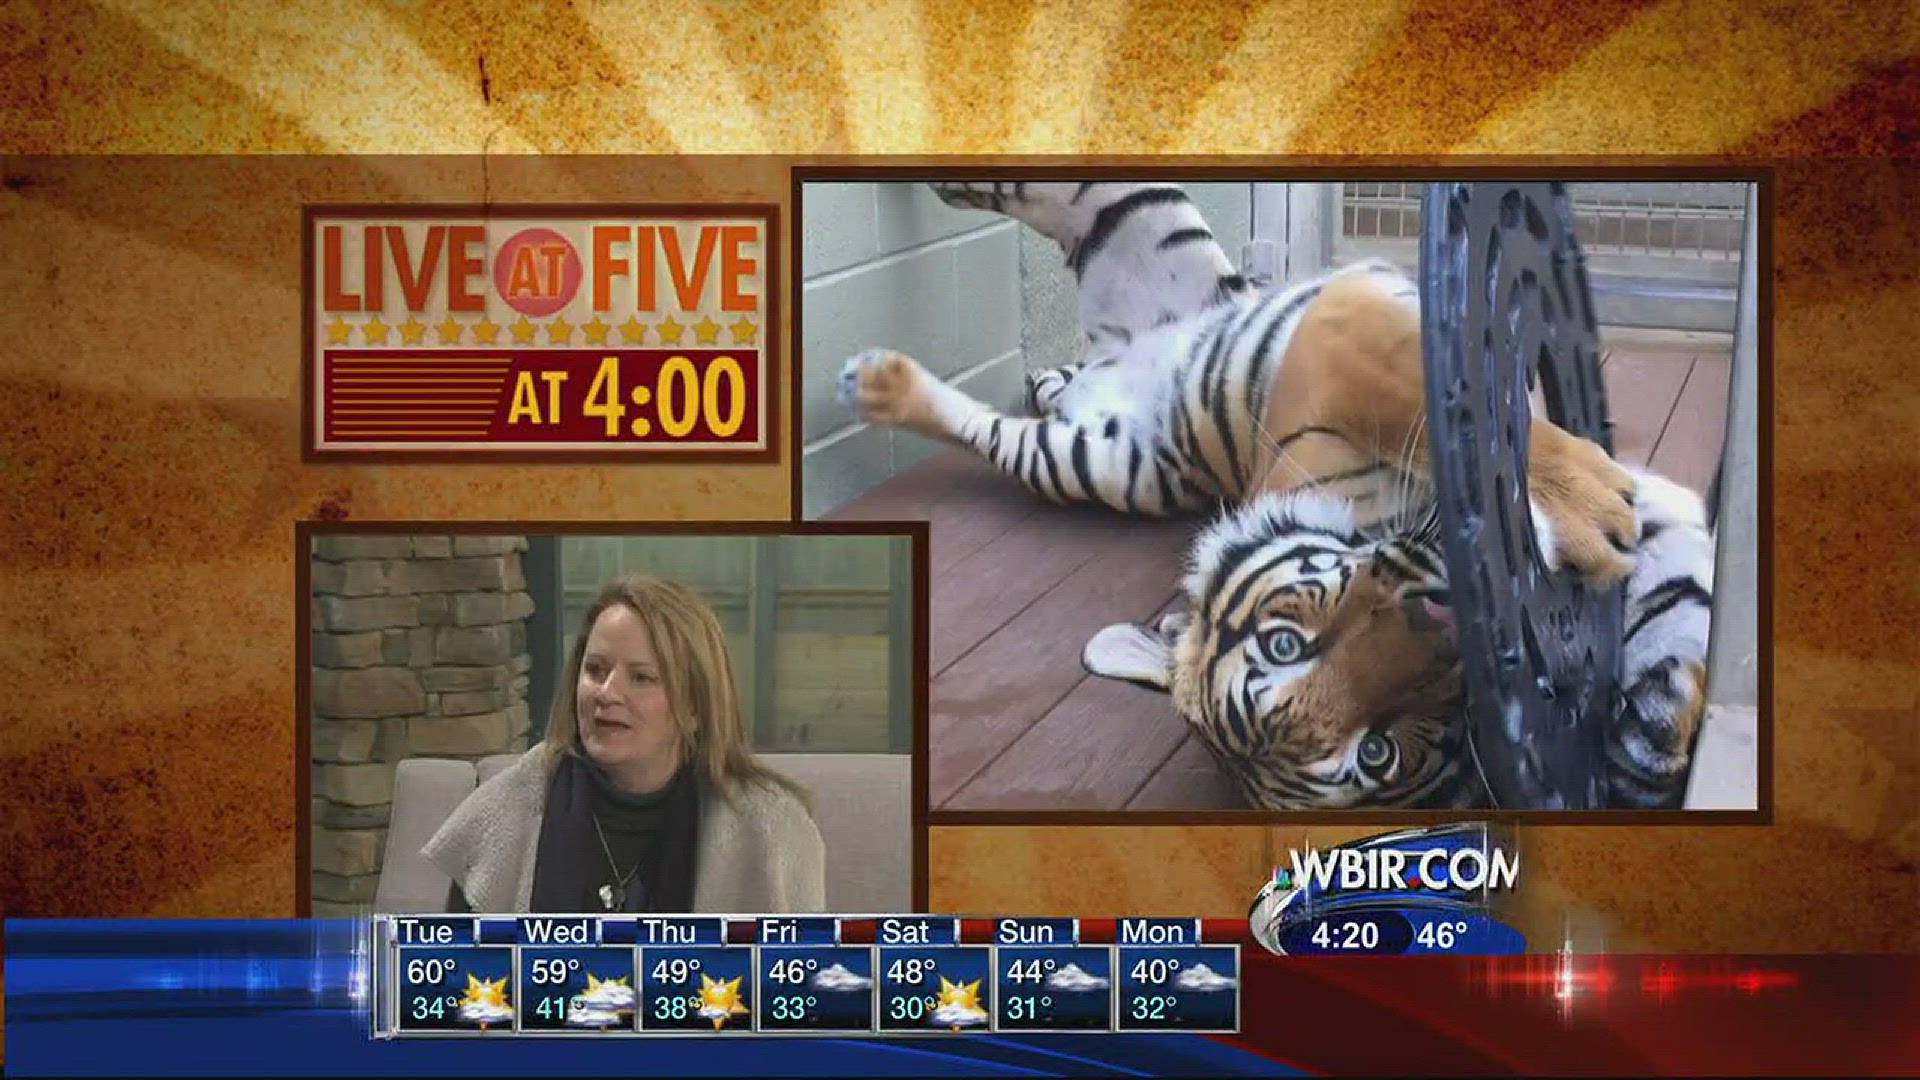 Live at Five at 4January 30, 2017The spring of 2017 will bring an exciting new attraction at Zoo Knoxville: Tiger Forest. For more information visit zooknoxville.org